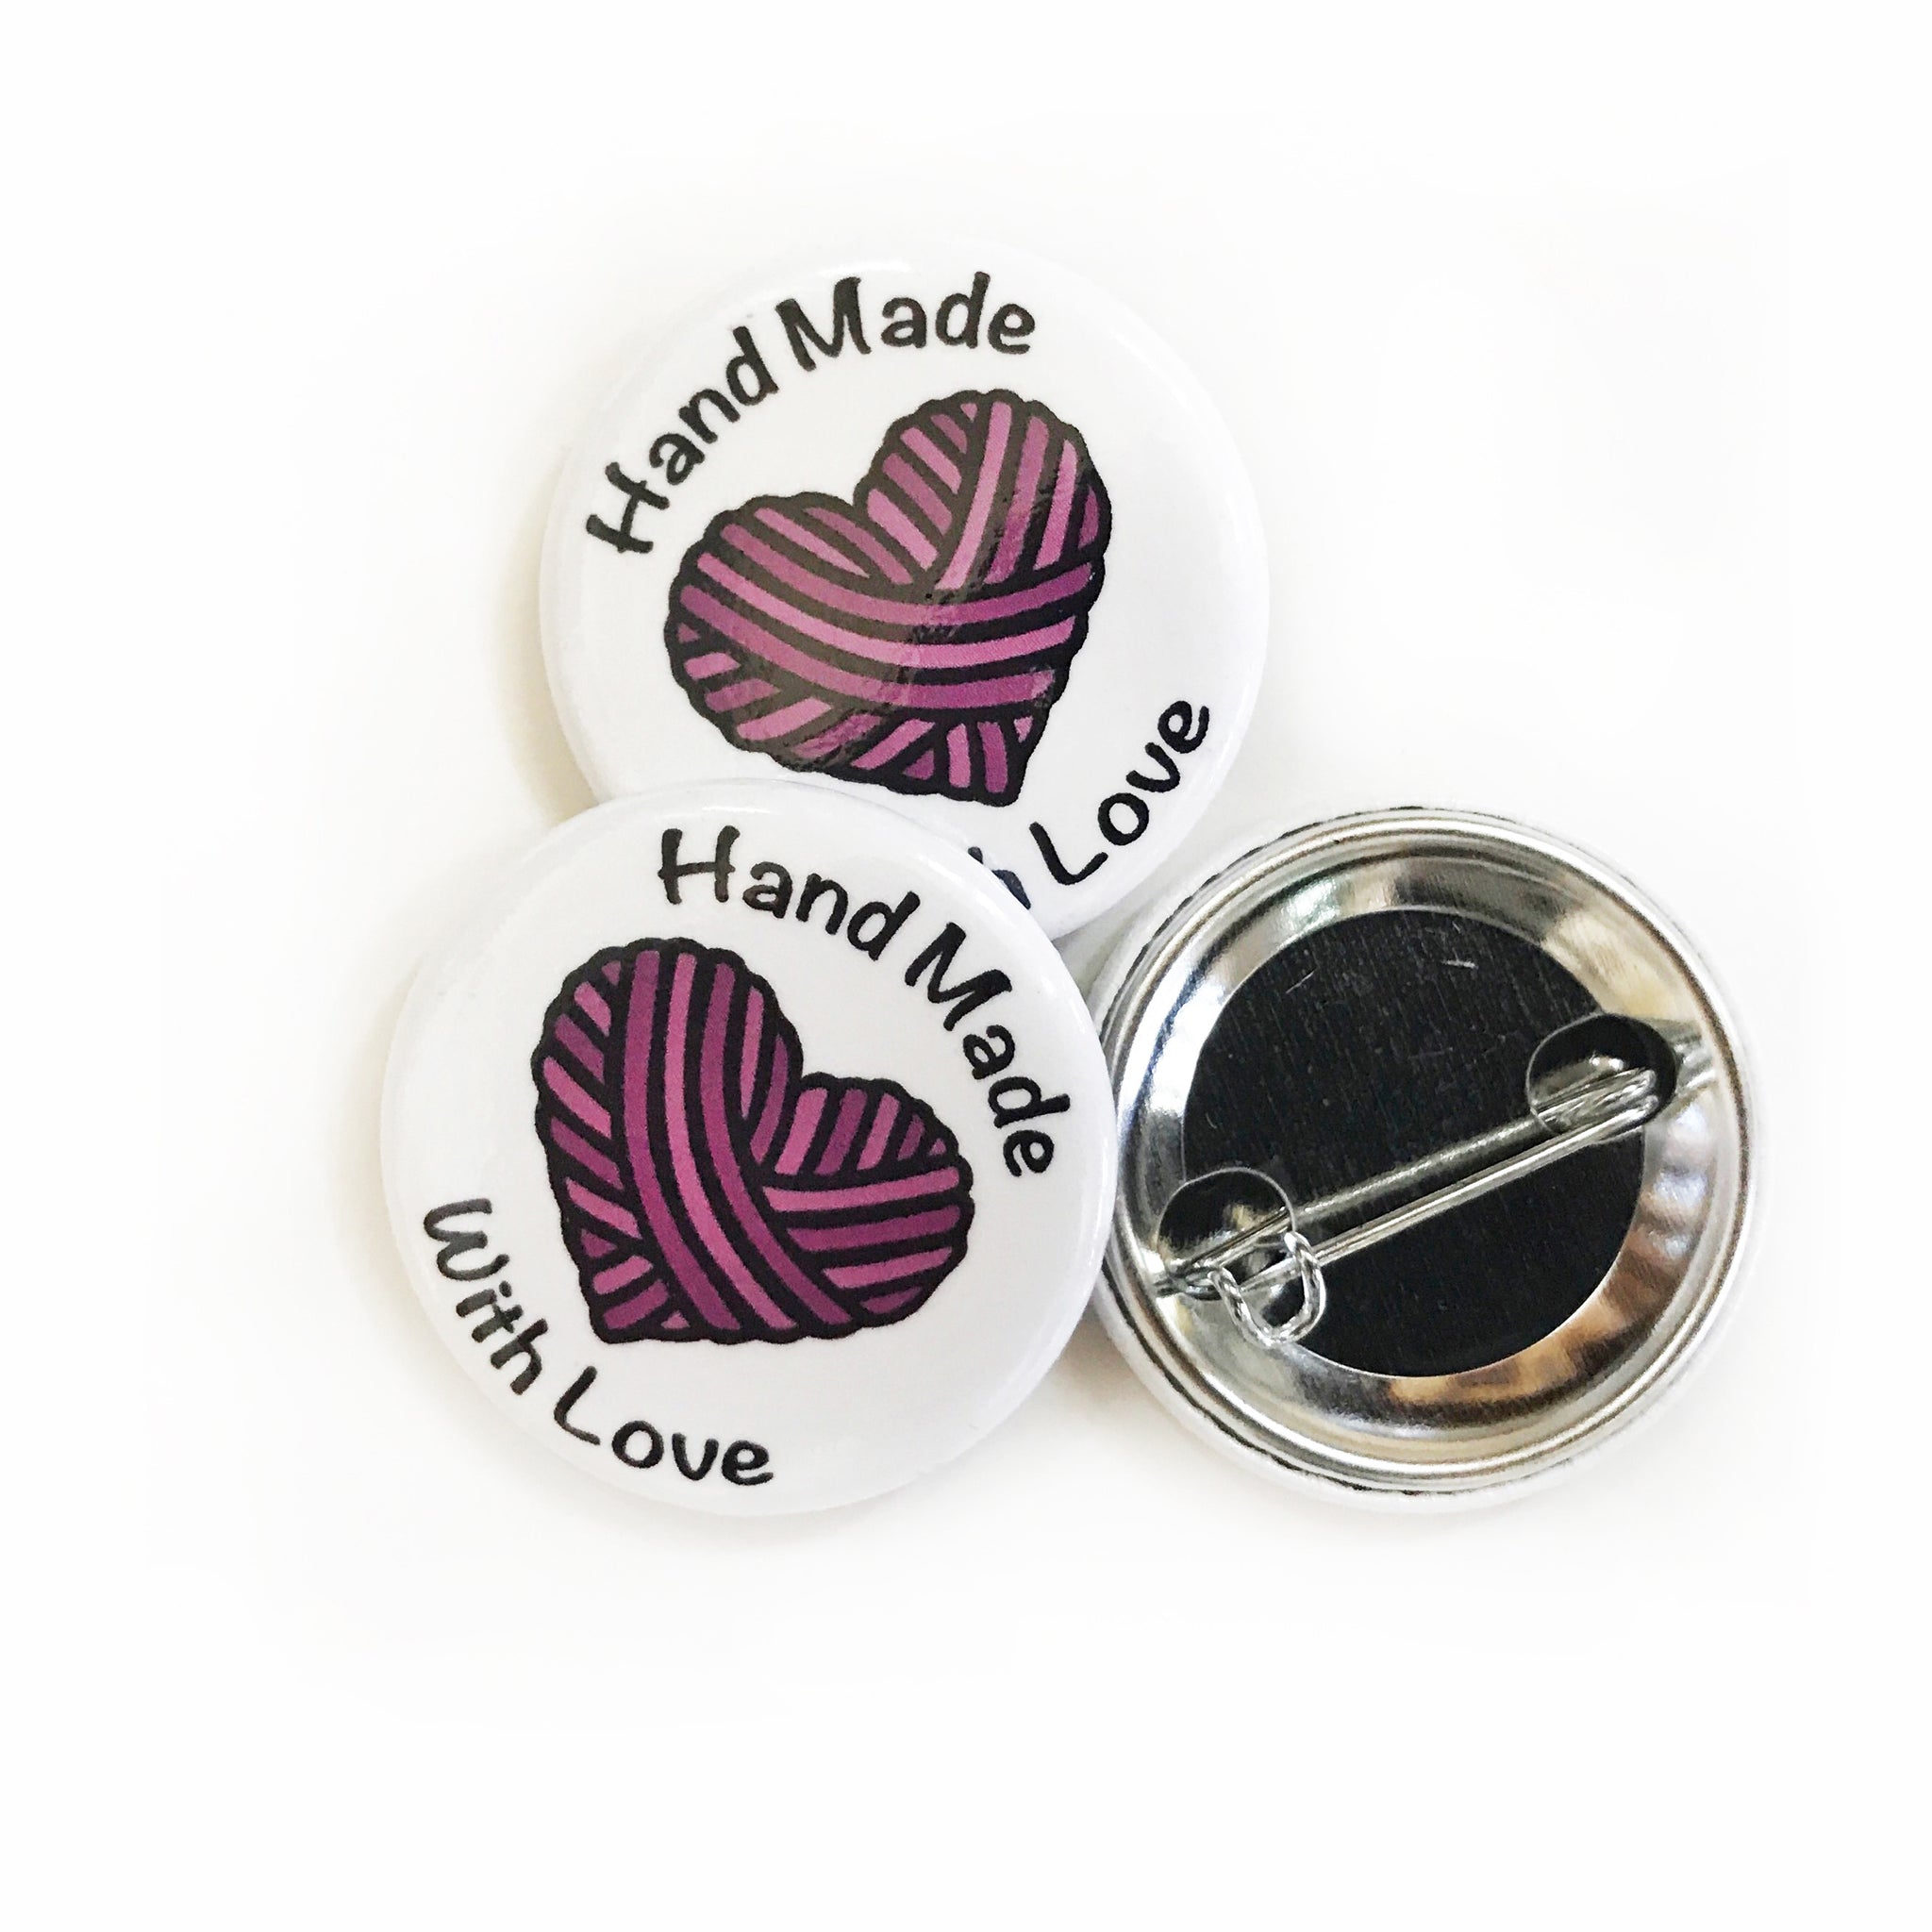 "Hand Made with Love" Button Pin